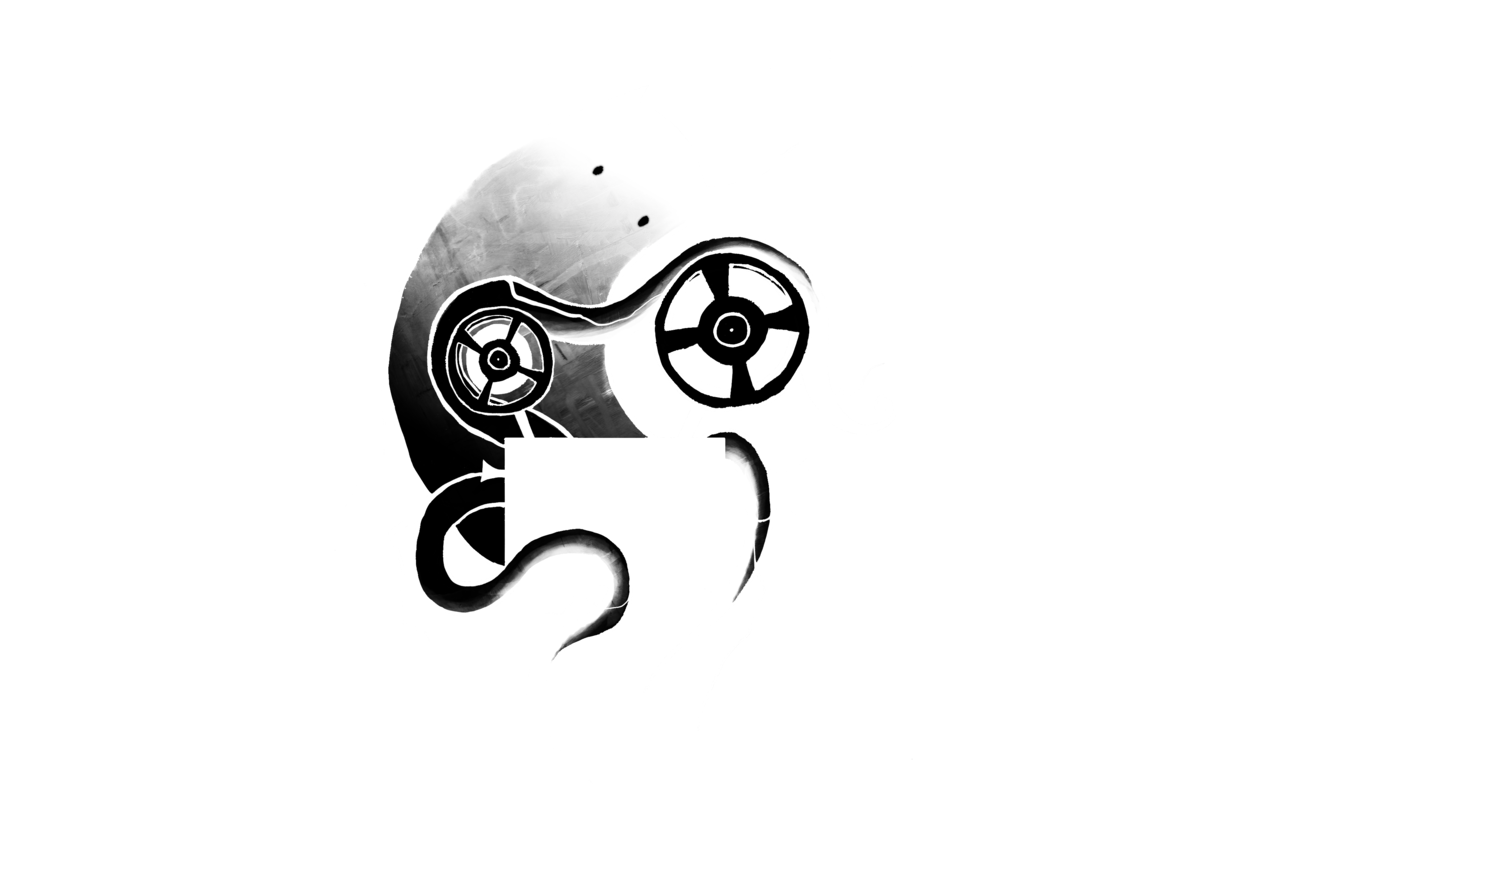 The Thing In The Basement Horror Fest